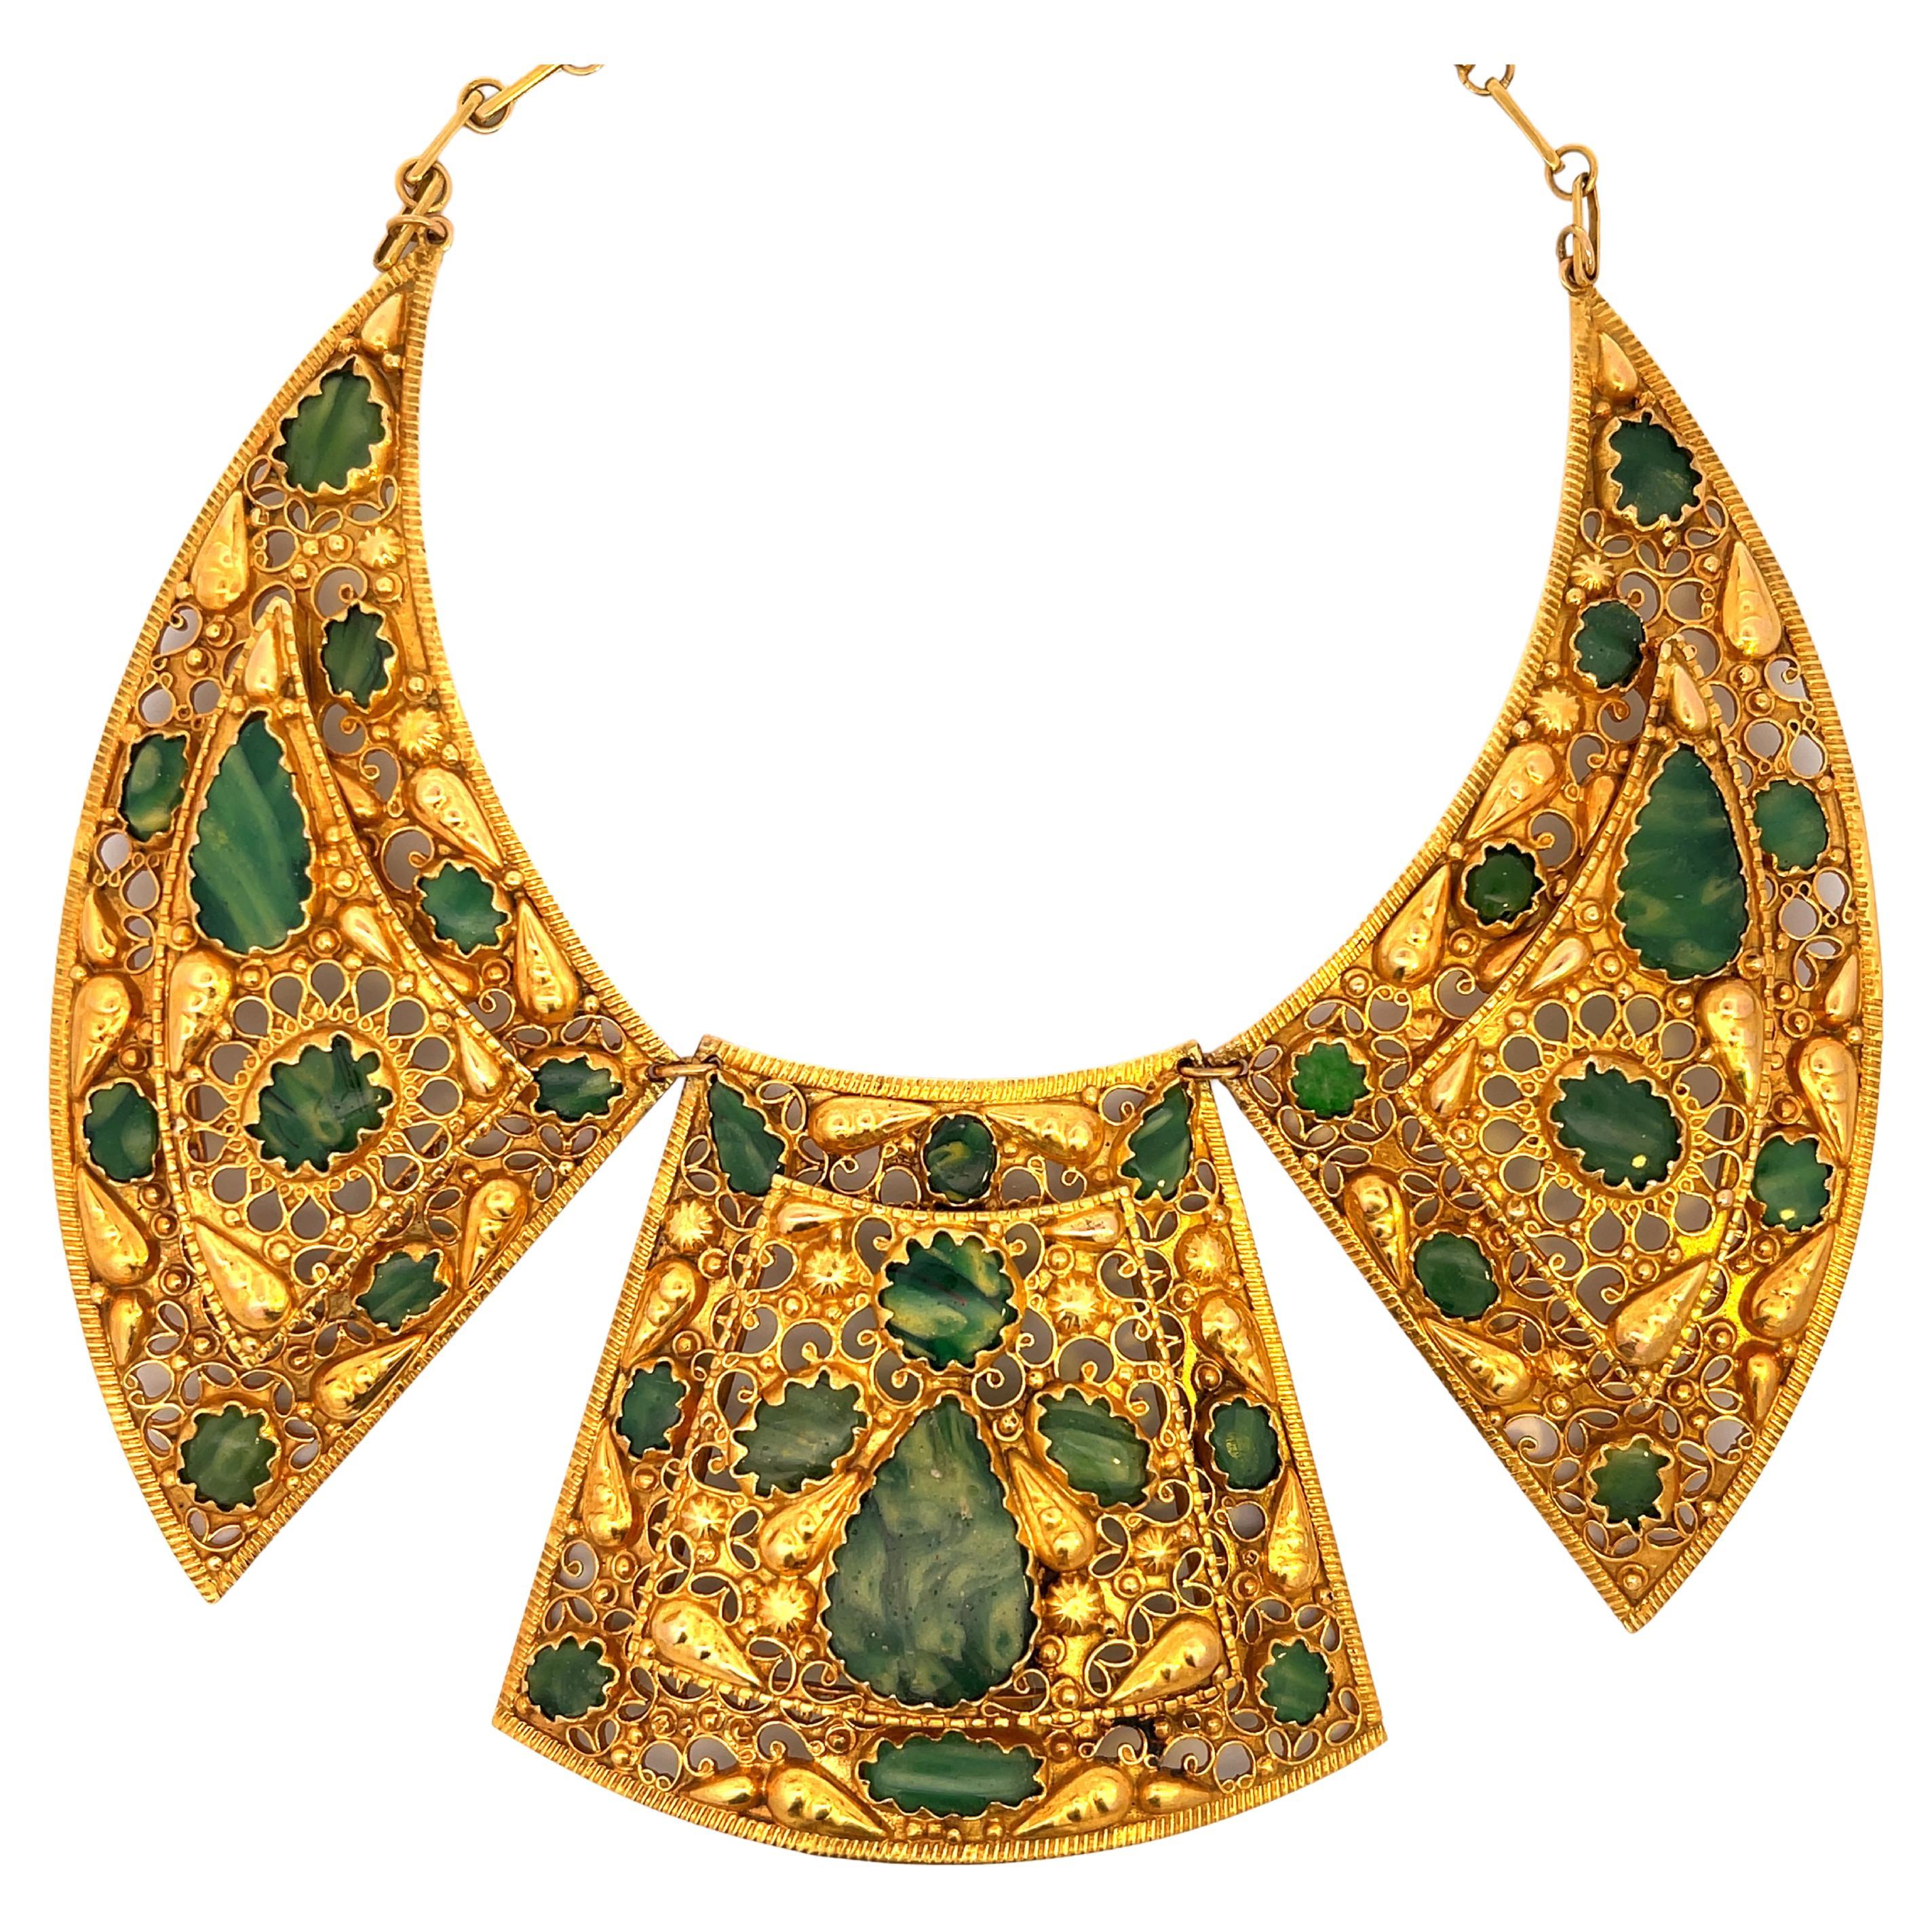 Rare Gold Egyptian Necklace with Green Venetian Stained Glass For Sale